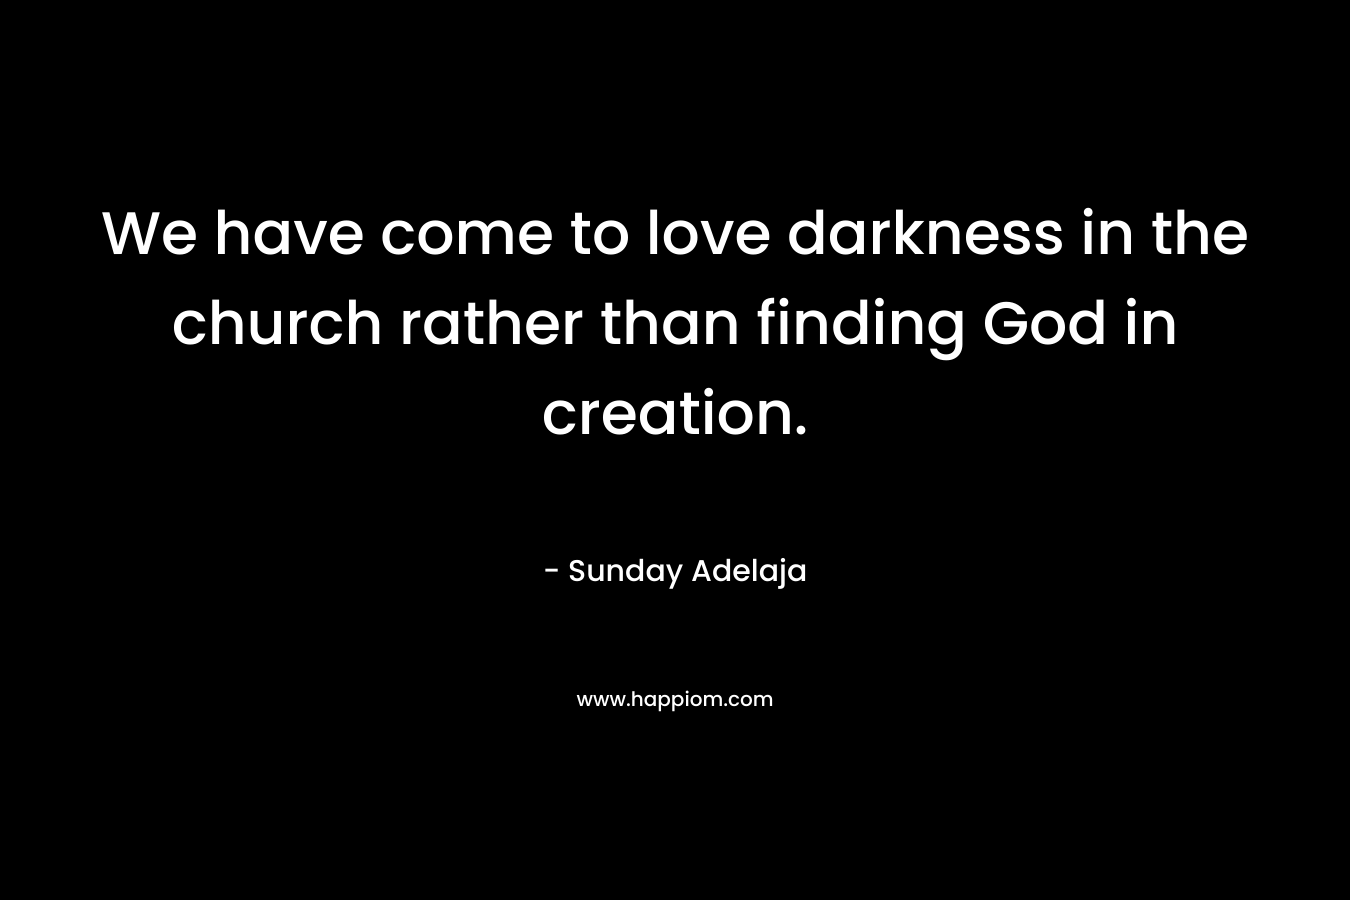 We have come to love darkness in the church rather than finding God in creation.